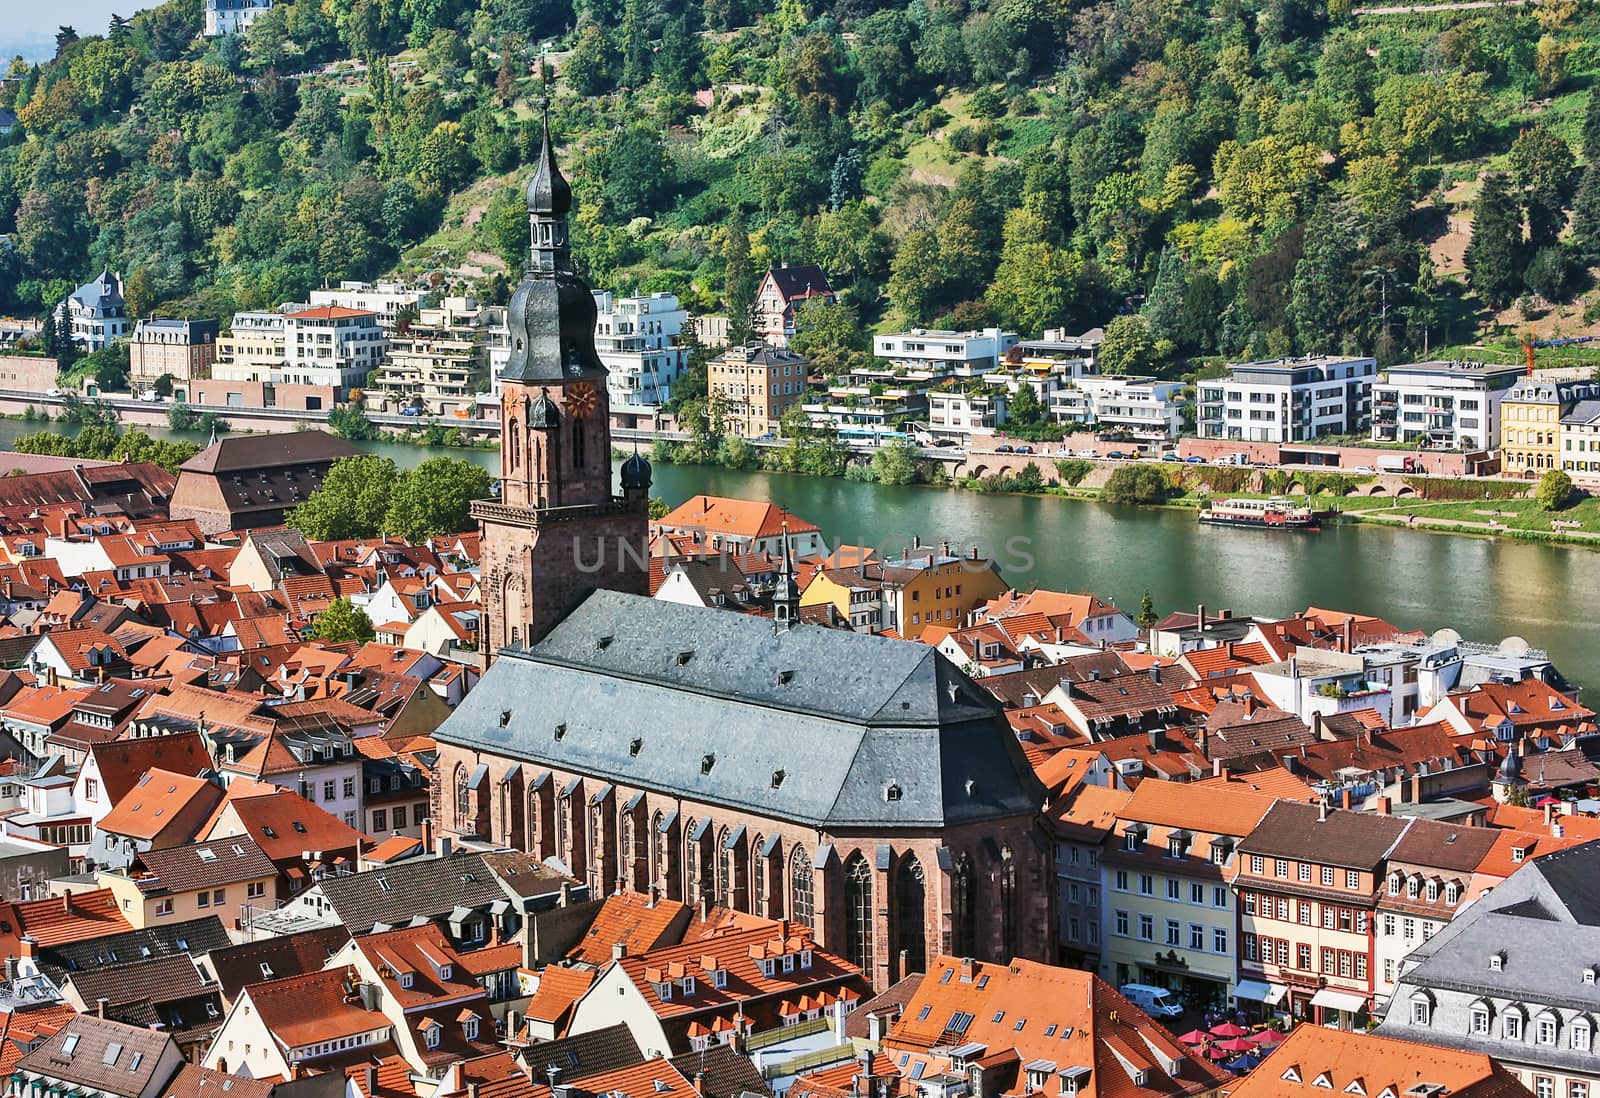 Situated on the banks of the river Neckar, Heidelberg is one of Germany’s most beautiful towns. Top view of the Heidelberg